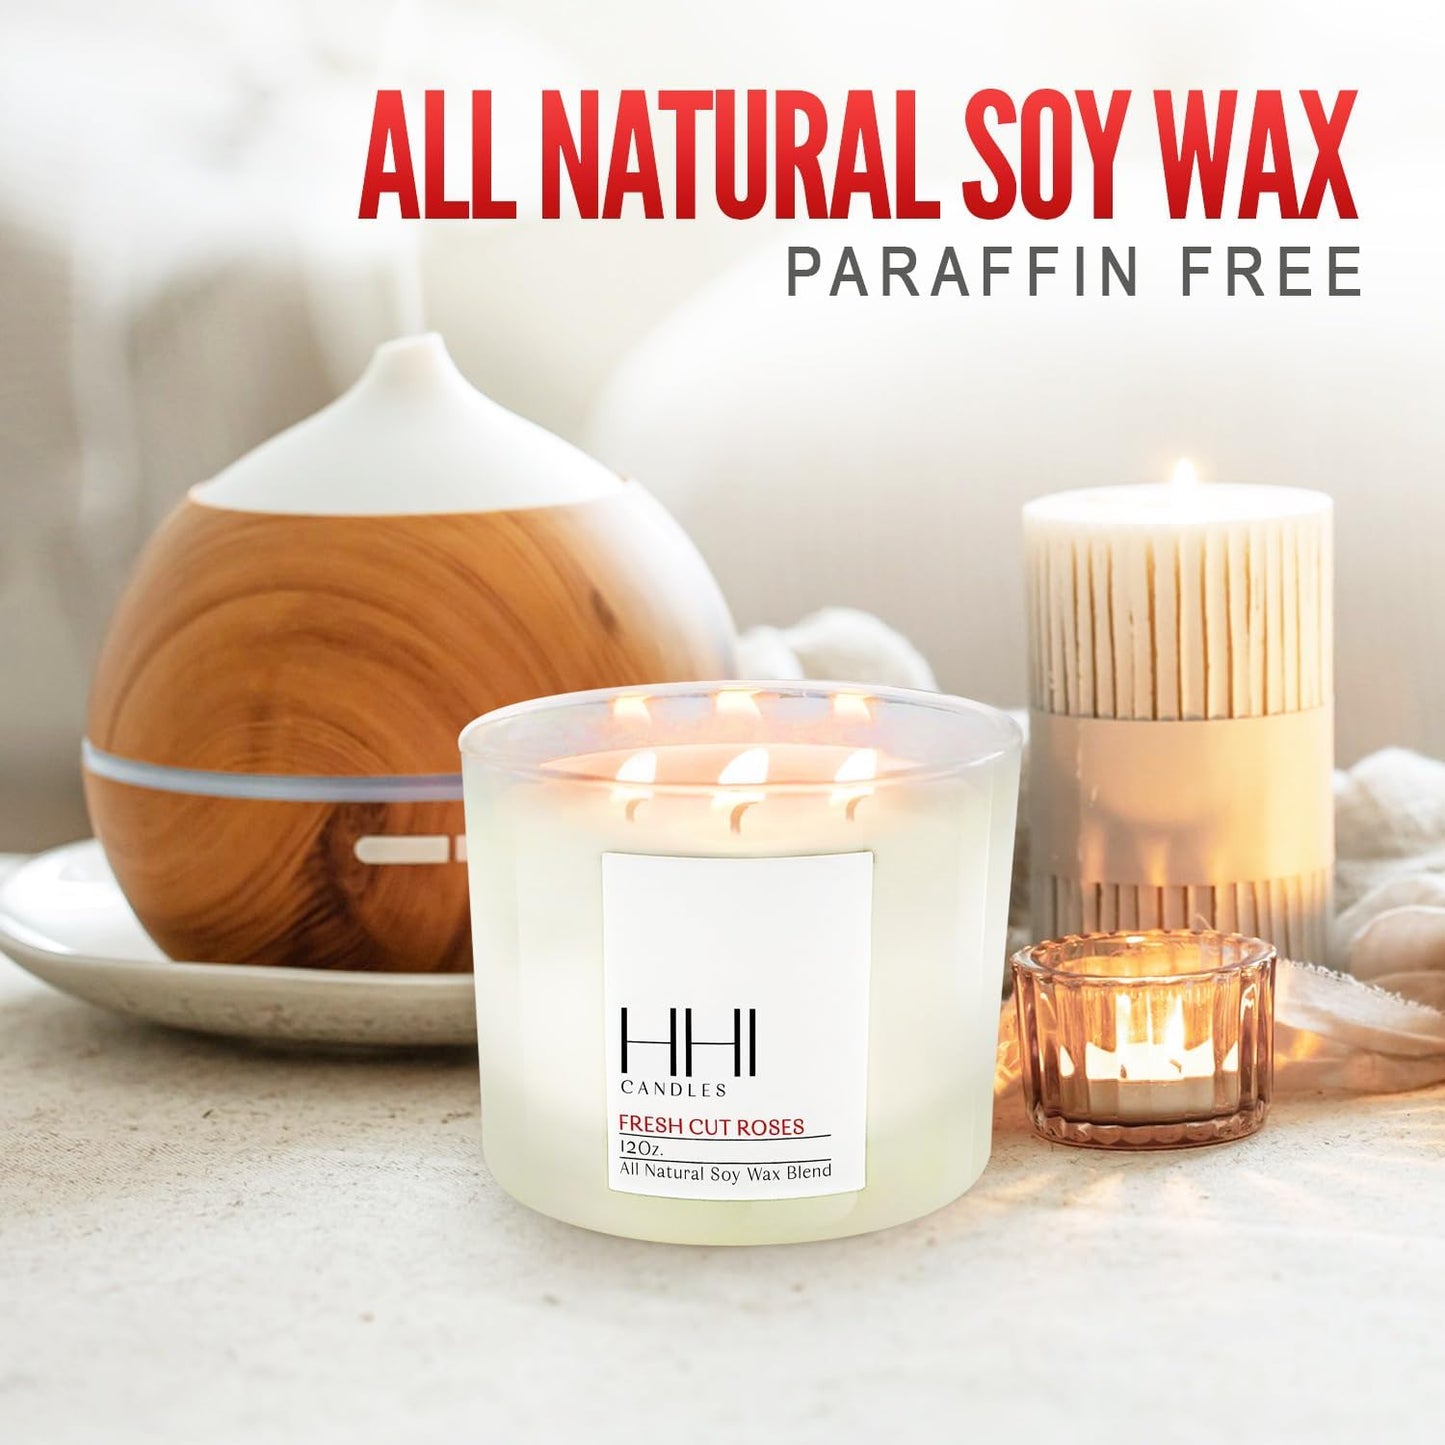 Organic Soy Wax Candle | Luxury & Unique Large Candles for Home Scented | Burning Rose Scented Candles Gifts for Women | Long Lasting Romantic Soy Candles | 12 Ounce 3 Wick Candles